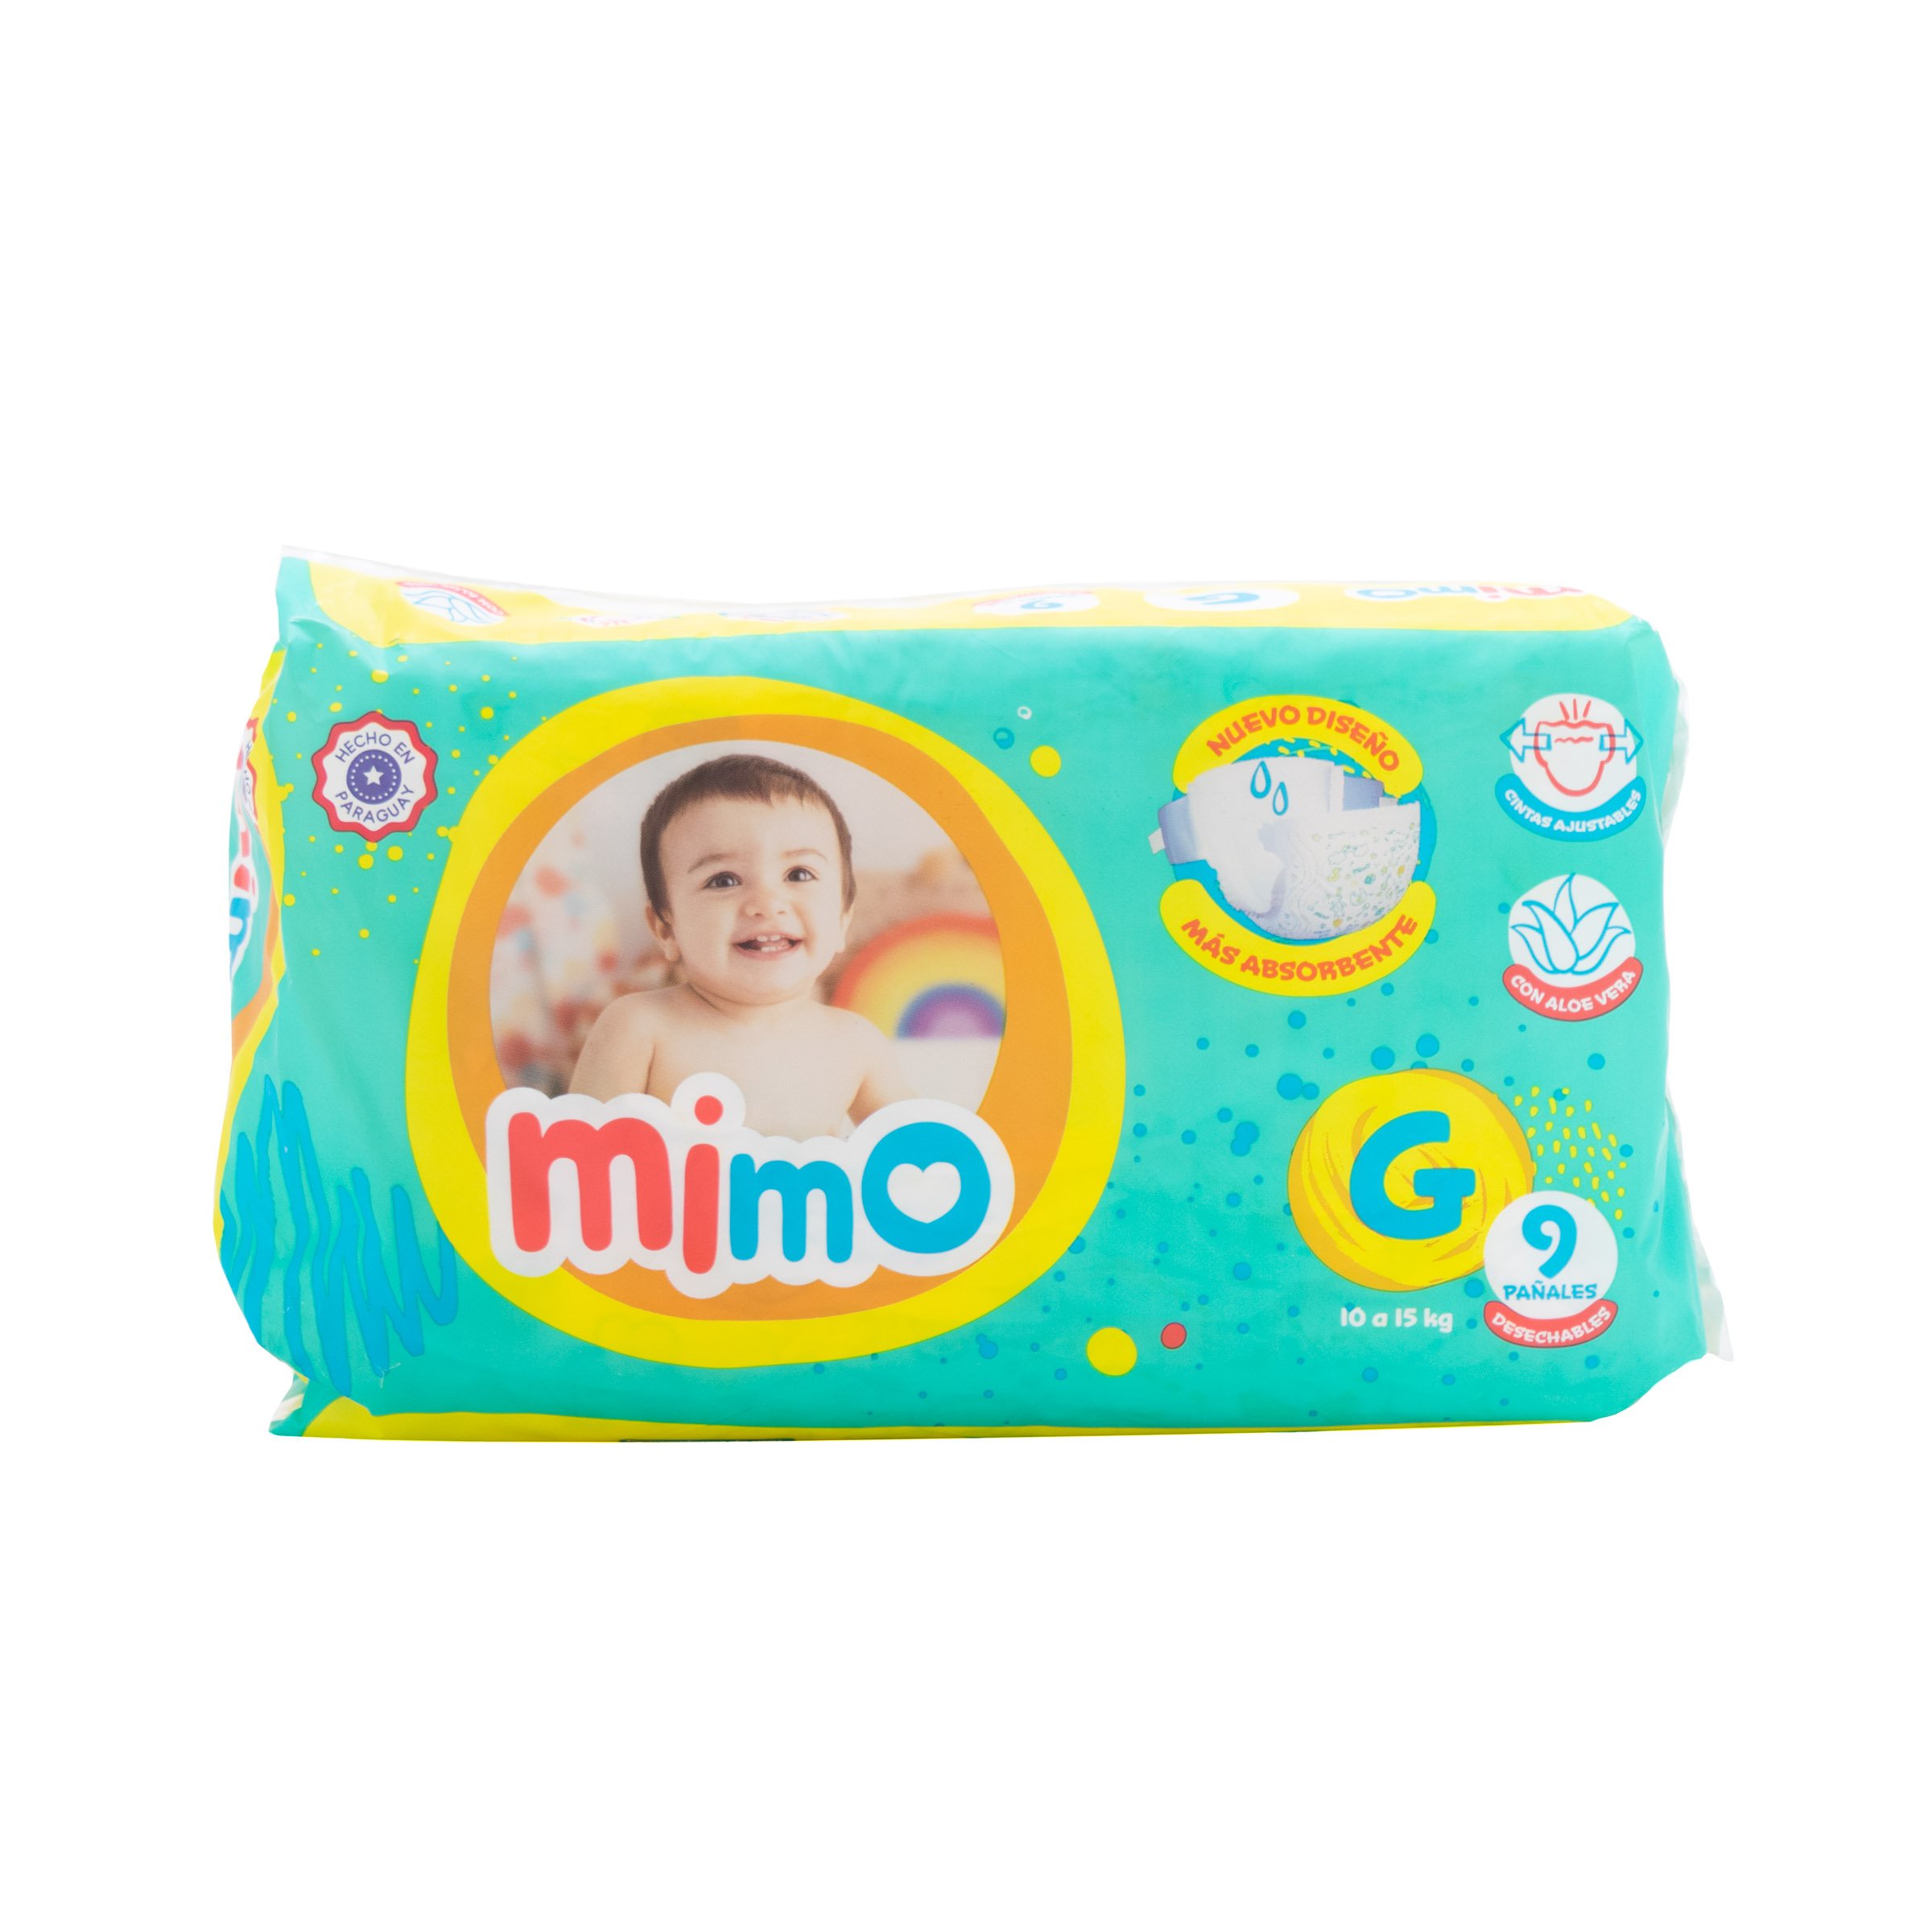 MIMO PANAL ECO G X 9 UNID